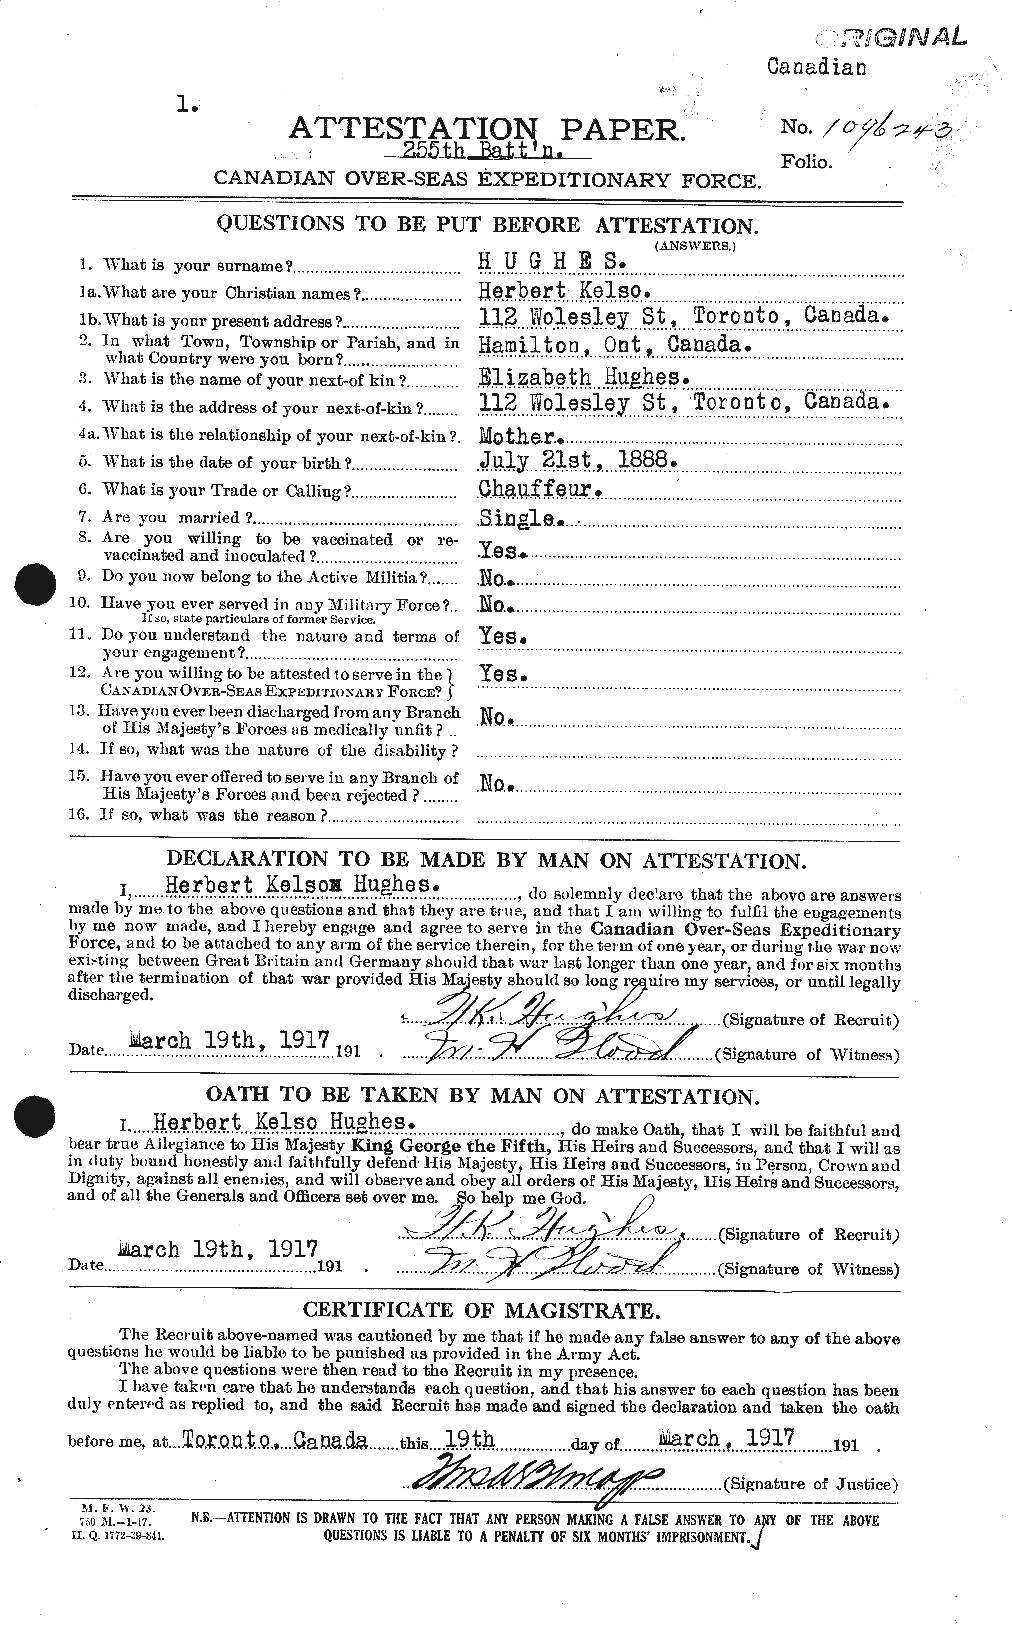 Personnel Records of the First World War - CEF 403902a